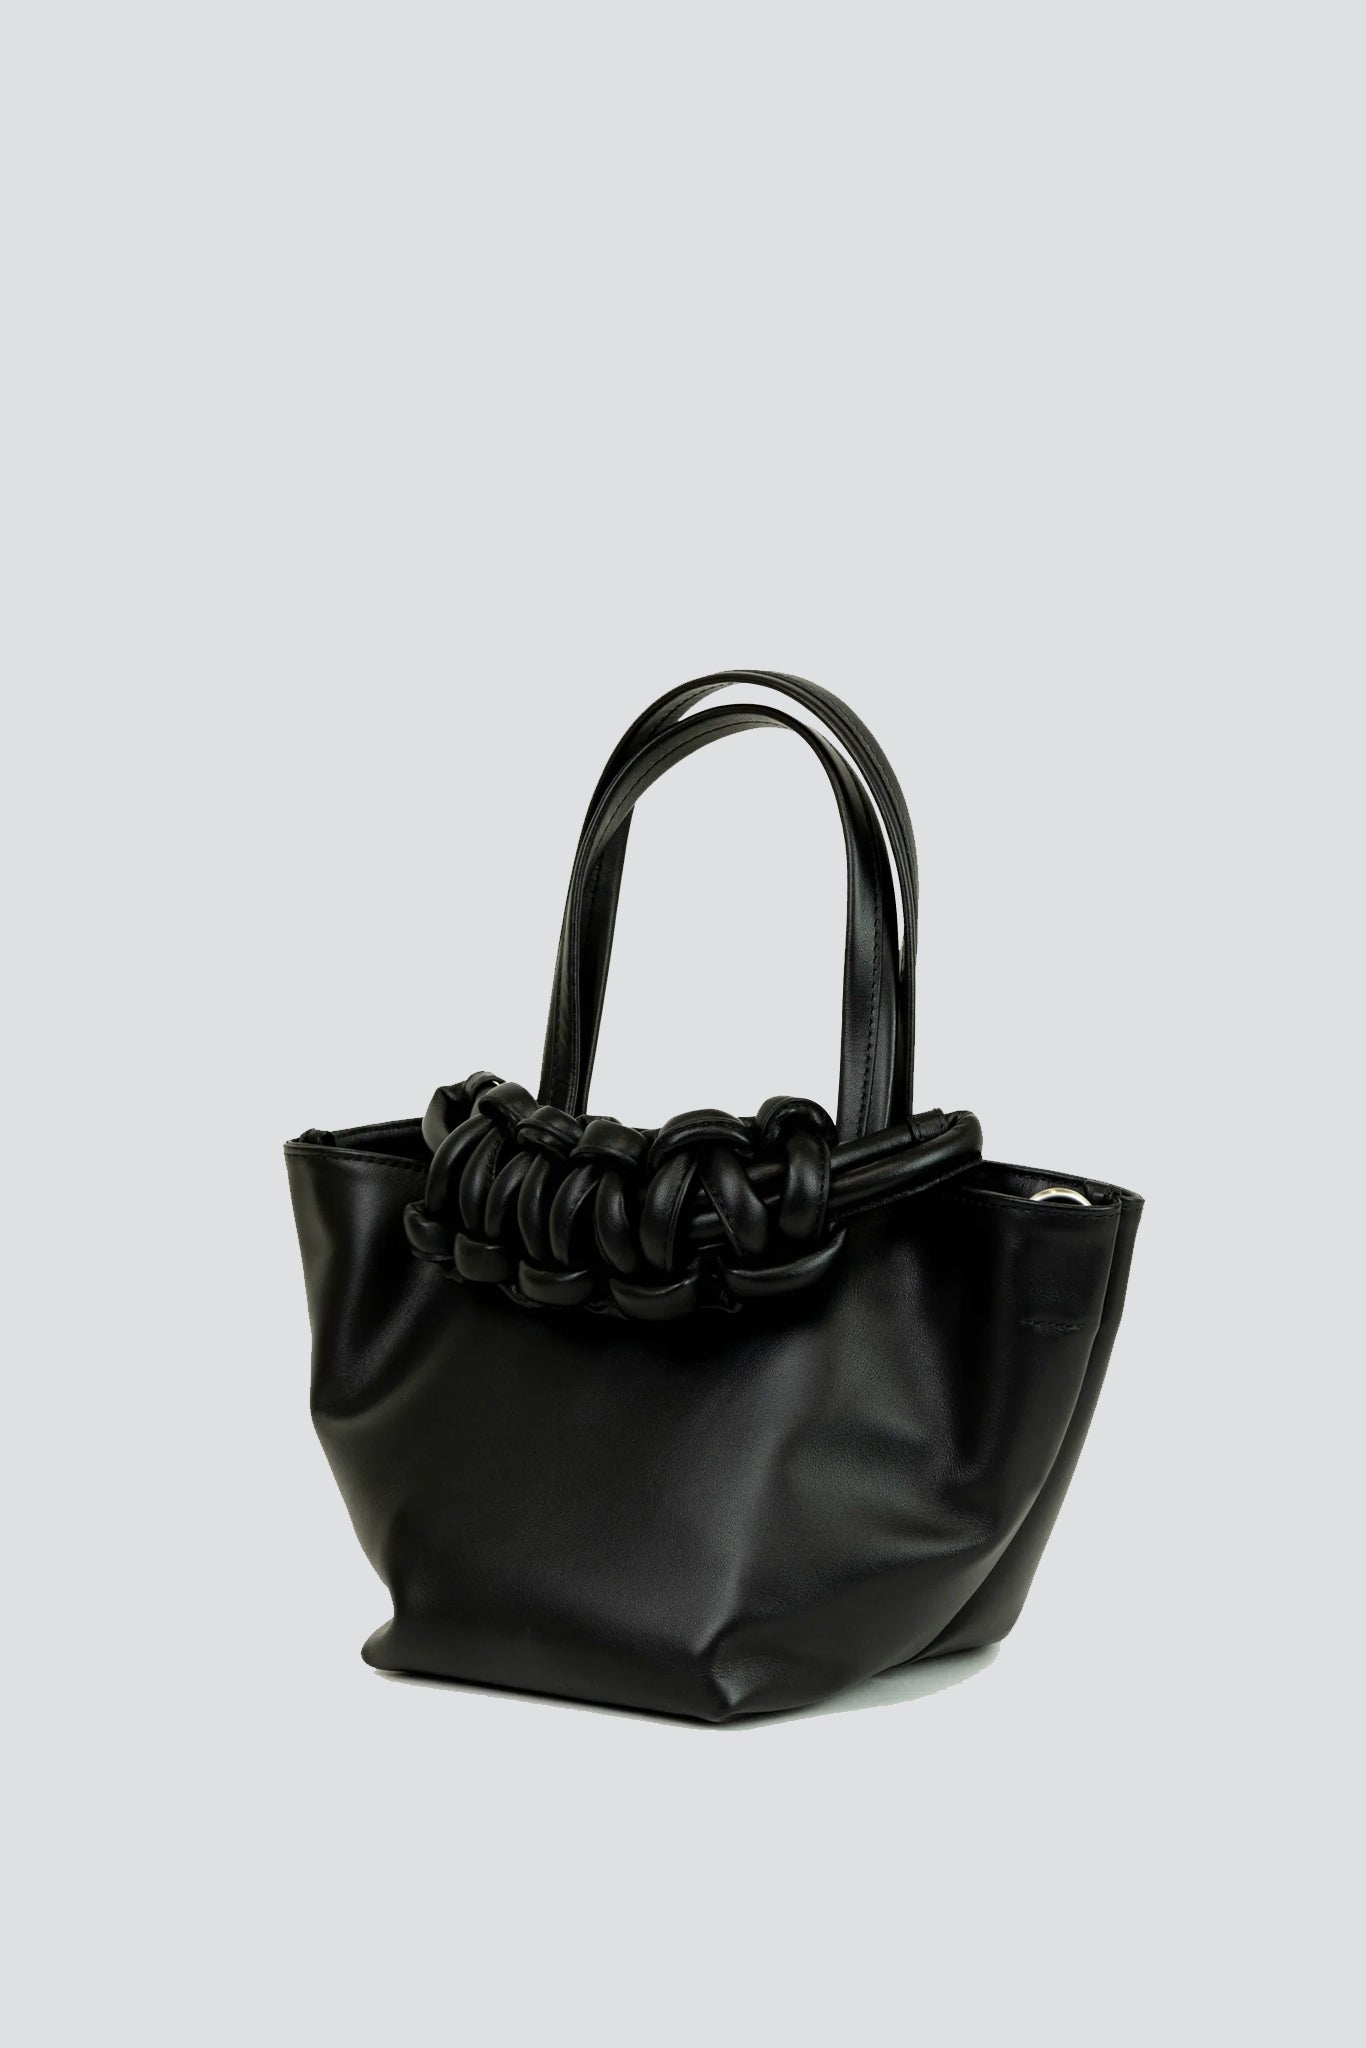 Black Leather Pazar Chisai Tote